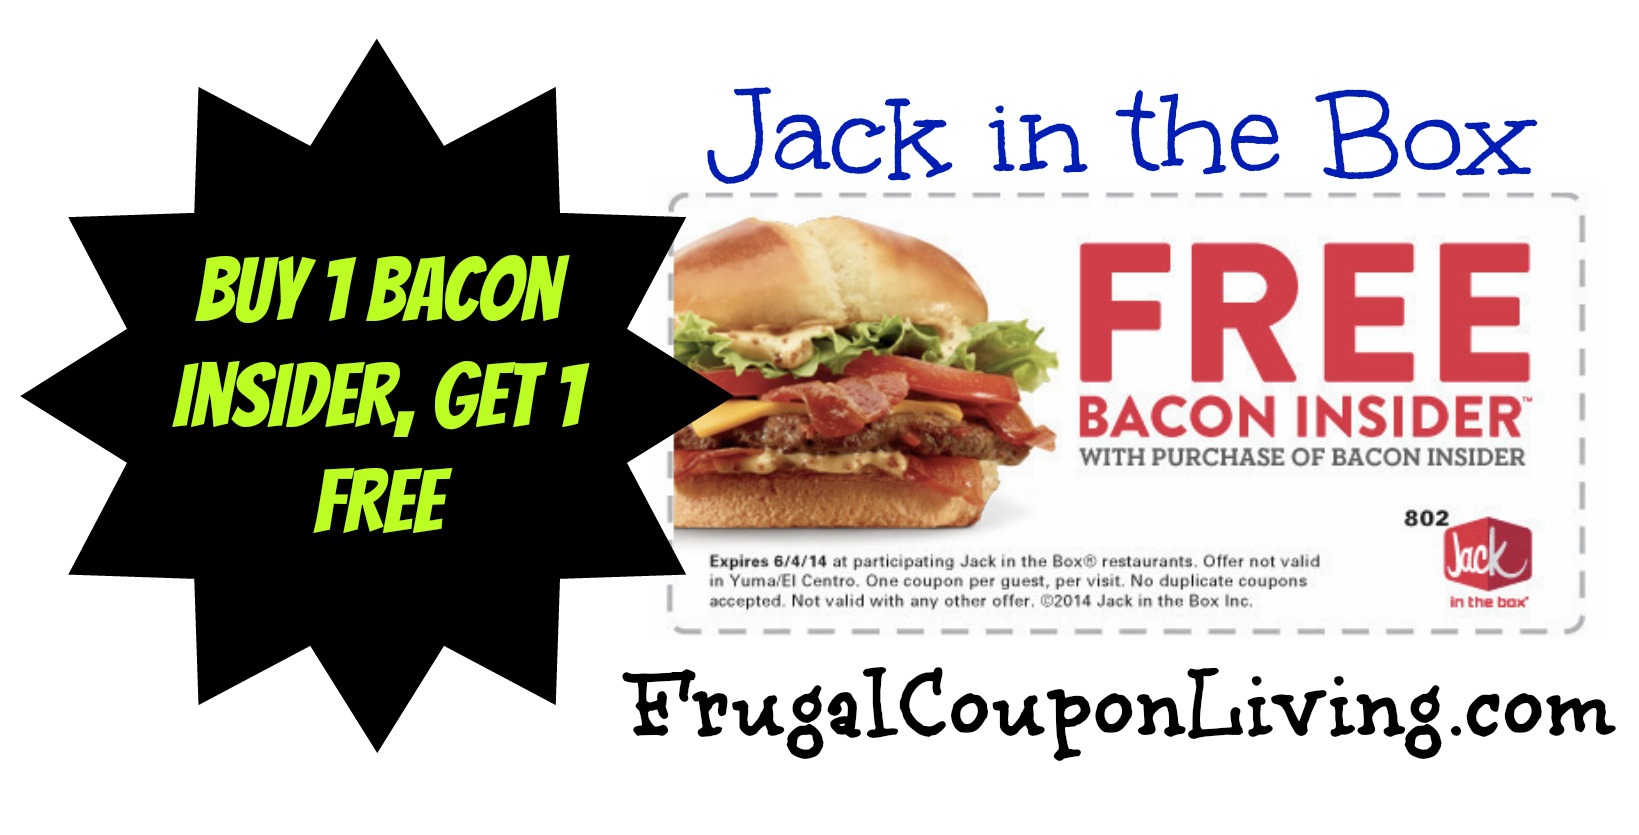 Jack in the Box Coupon for a FREE Bacon Insider